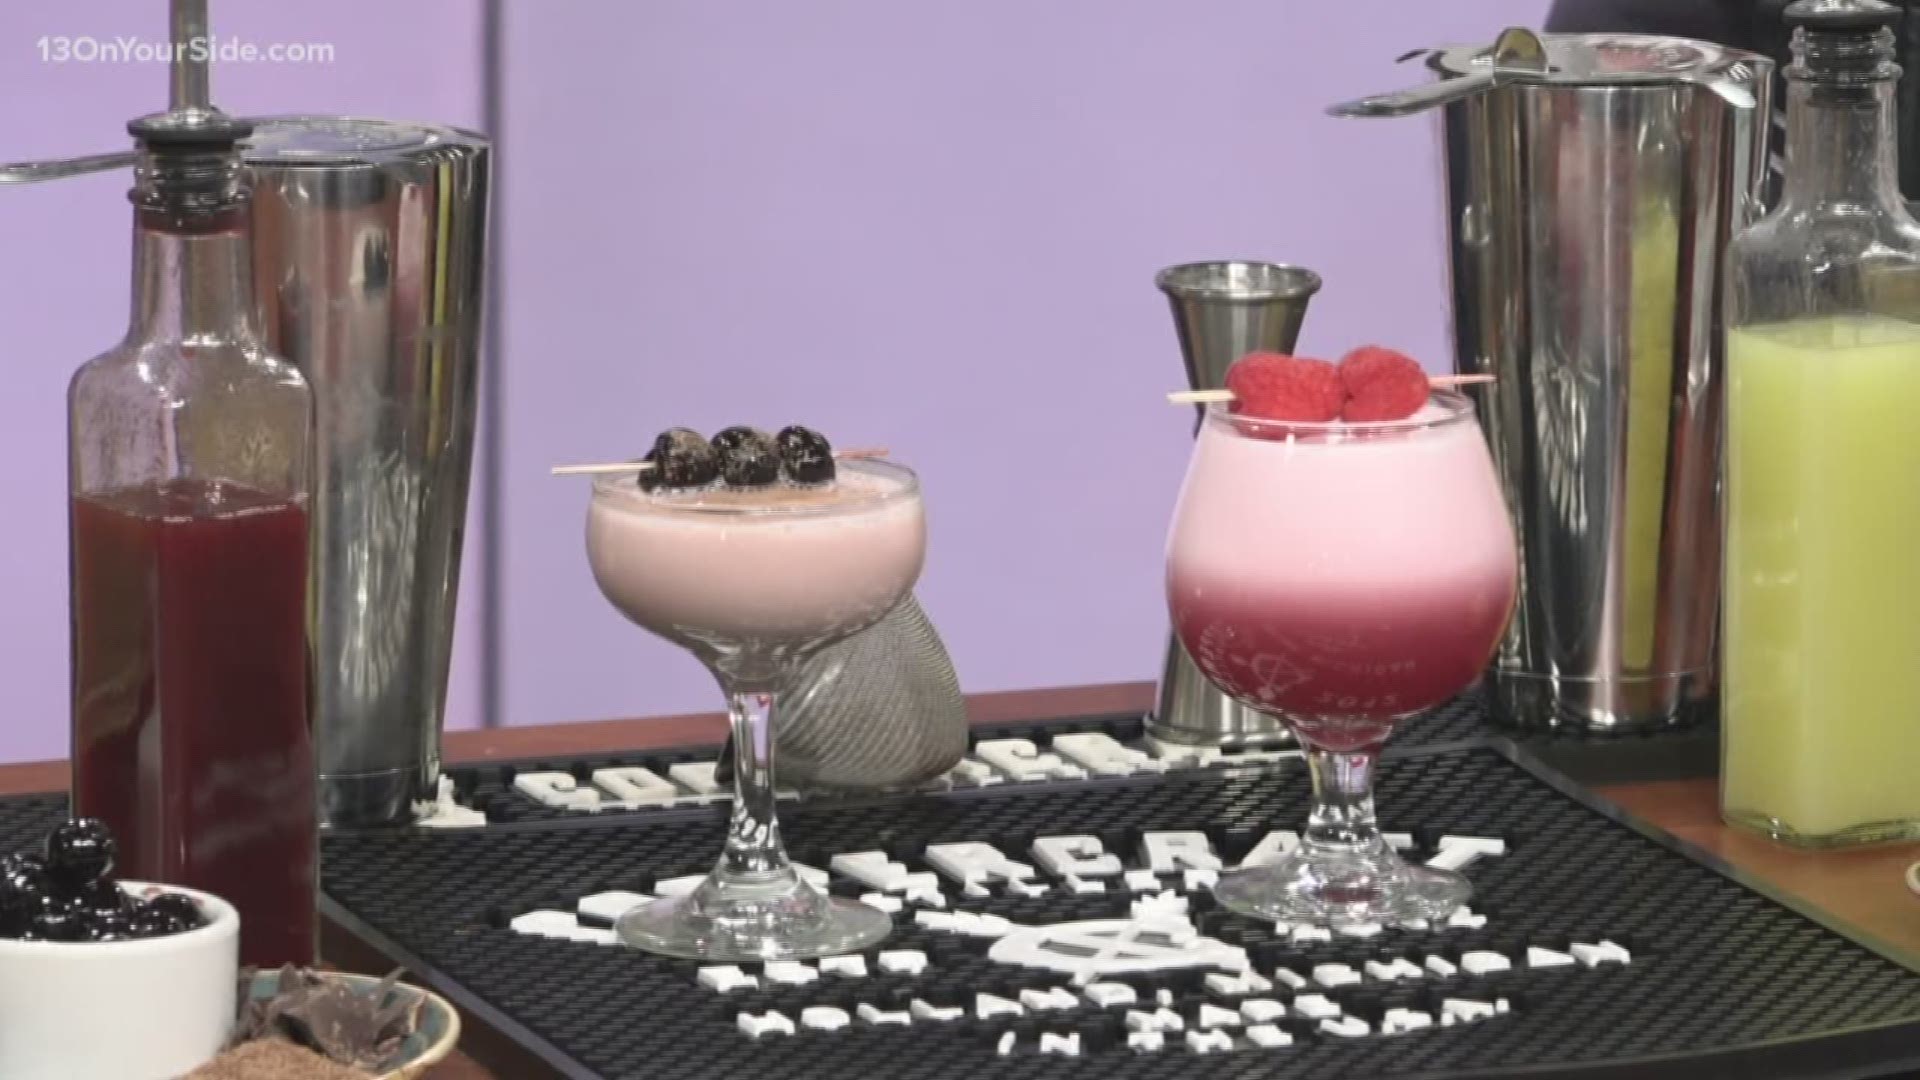 The lead bartender at Coppercraft Distillery shares two drinks you can make at home for your Valentine's Day celebration or enjoy at the distillery.